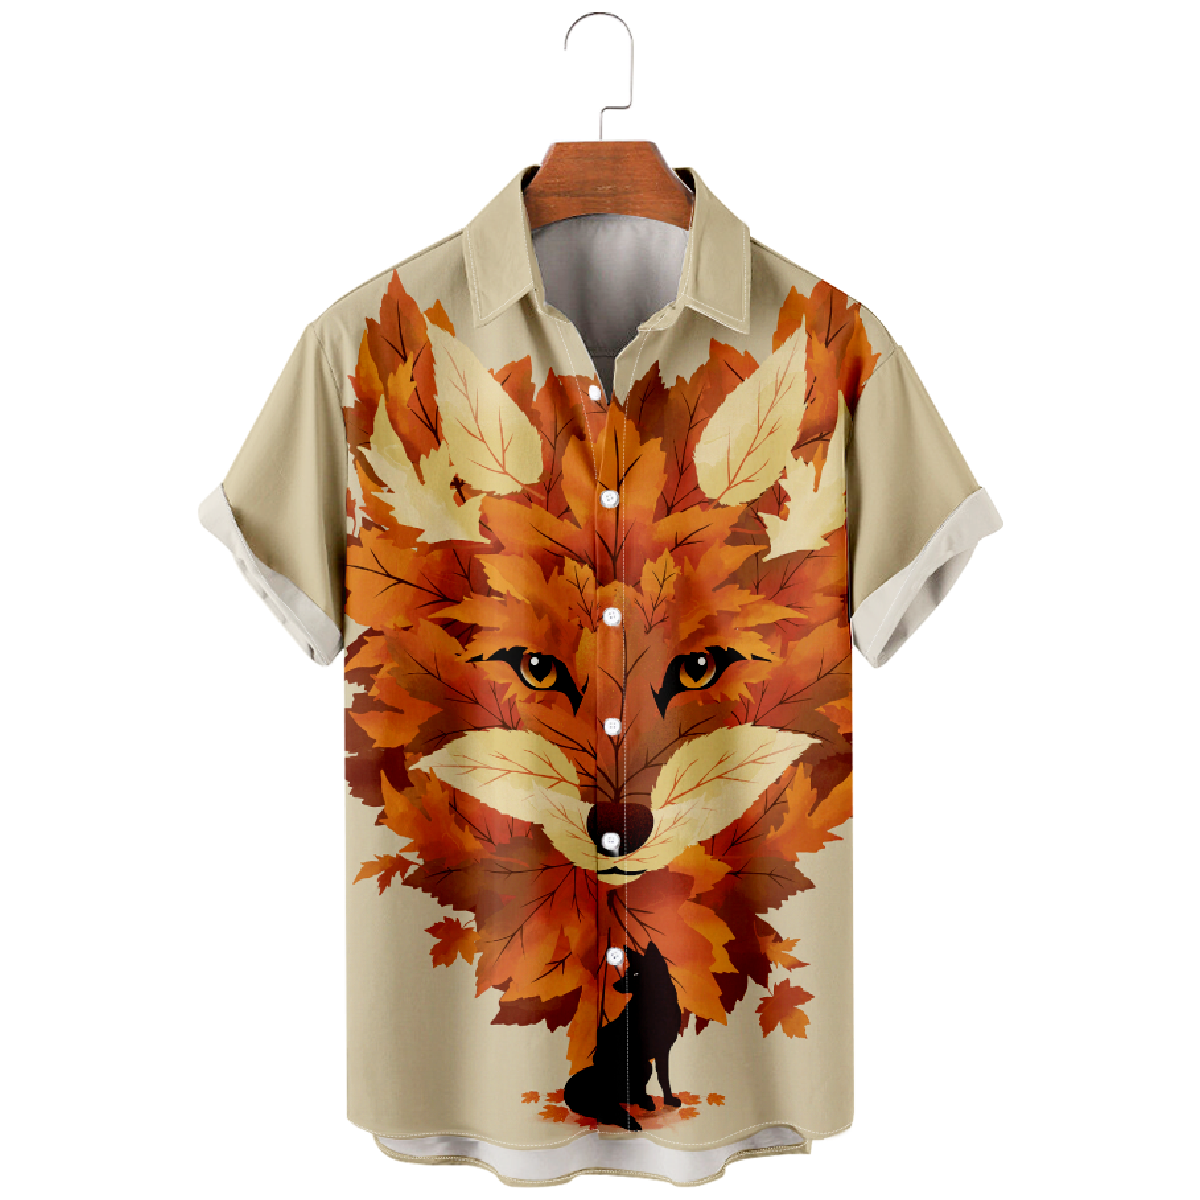 Fox and Nature Button Up Shirt Mens Short Sleeve Shirt Autuman Leaves and Fox Graphic Print